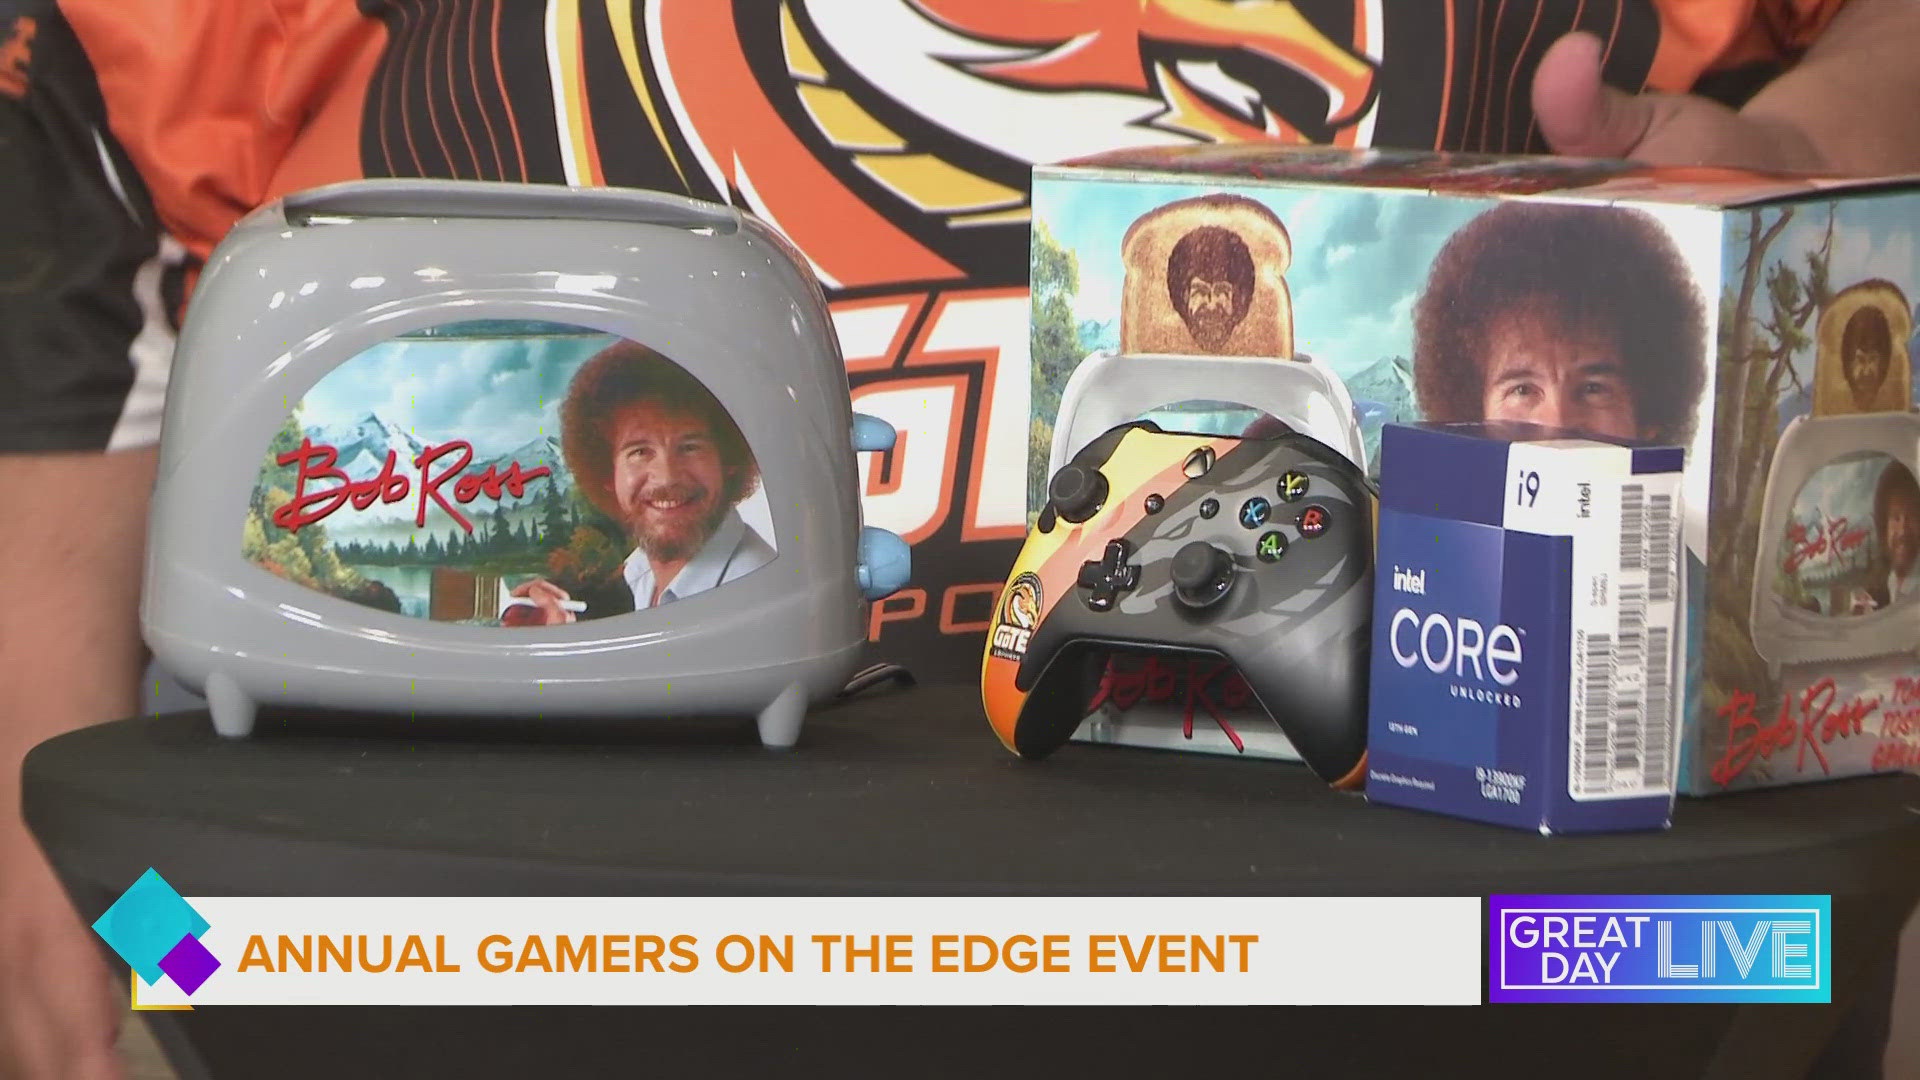 Gamers on the Edge is the annual charity event that helps children’s hospitals. It’s taking place next weekend in Clearwater. GamersOnTheEdge.com